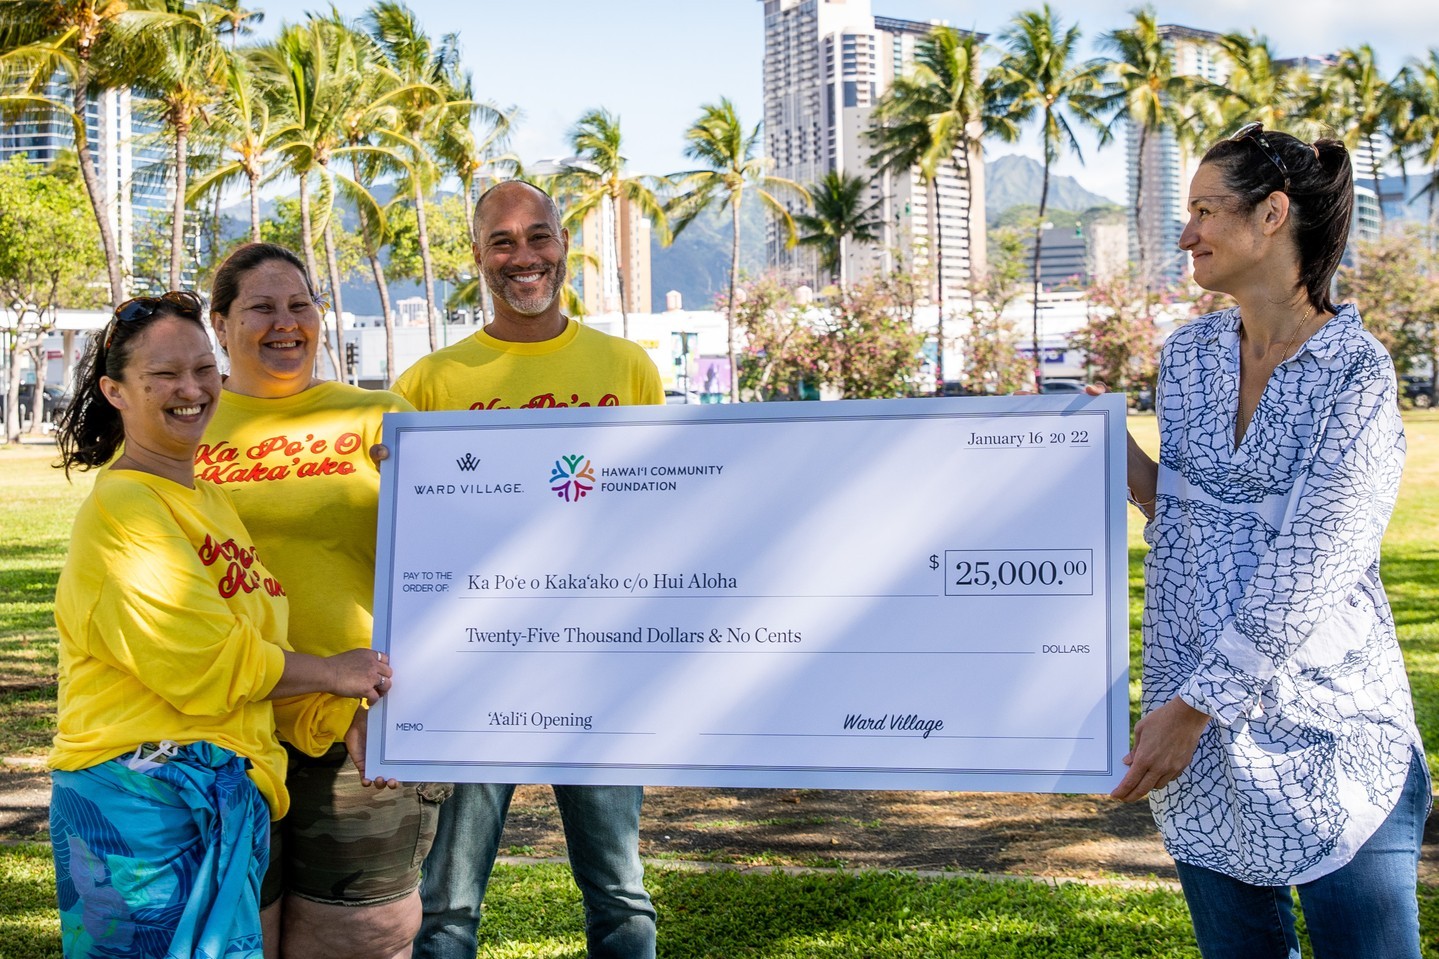 In celebration of the opening of ʻAʻaliʻi, Ward Village has partnered with Affordable Hawaiʻi for All Fellows and Ka Poʻe o Kakaʻako by funding $25,000 towards current fellows of the program to continue their fellowship in advocating and designing an affordable and inclusive Hawaiʻi for all.